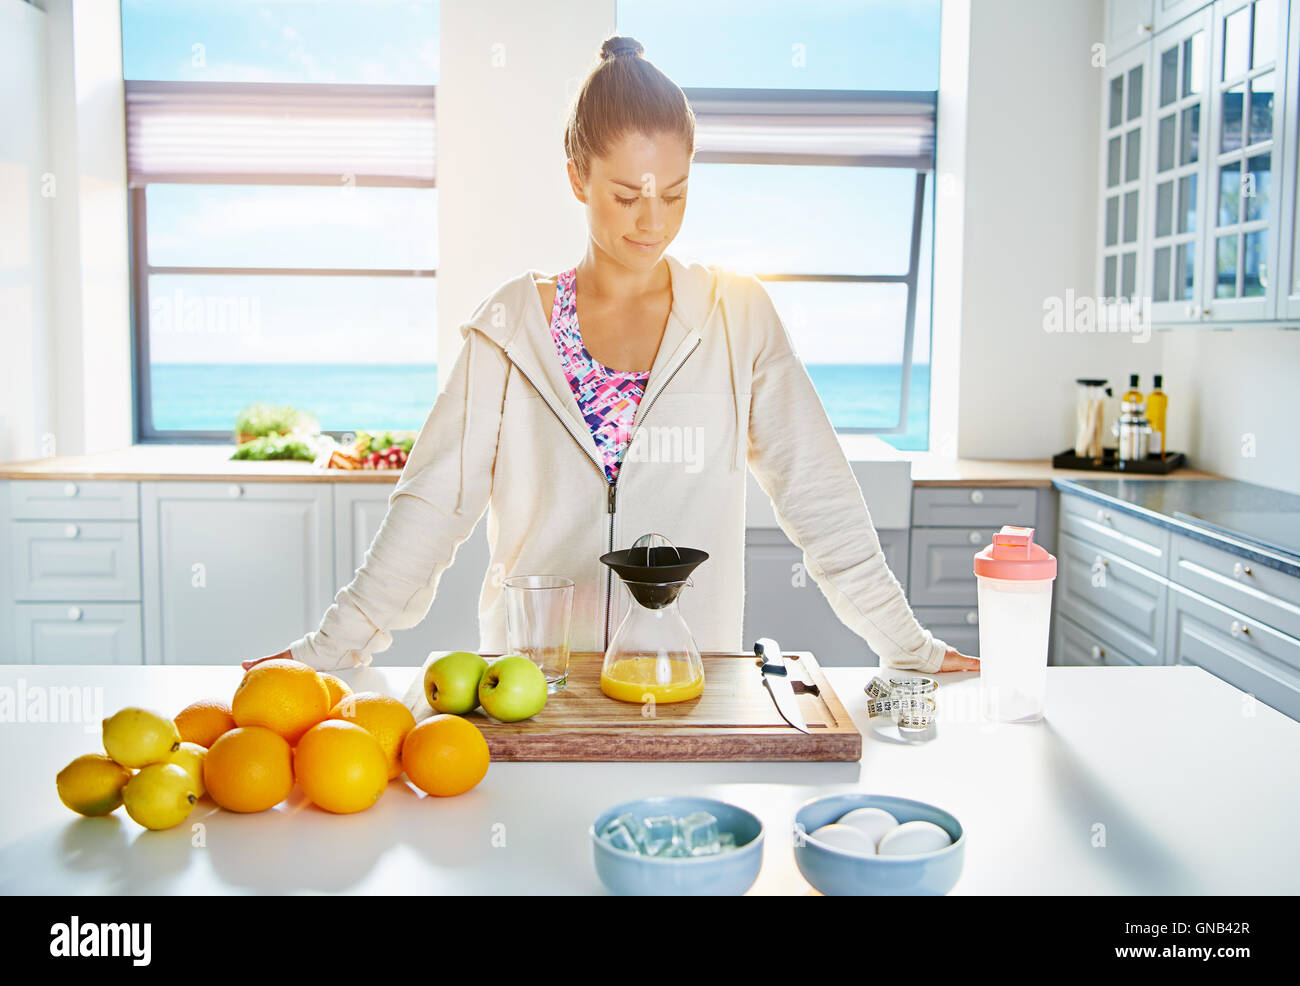 Pretty healthy young woman making juice in her kitchen form an assortment of fresh fruit in a healthy diet concept Stock Photo